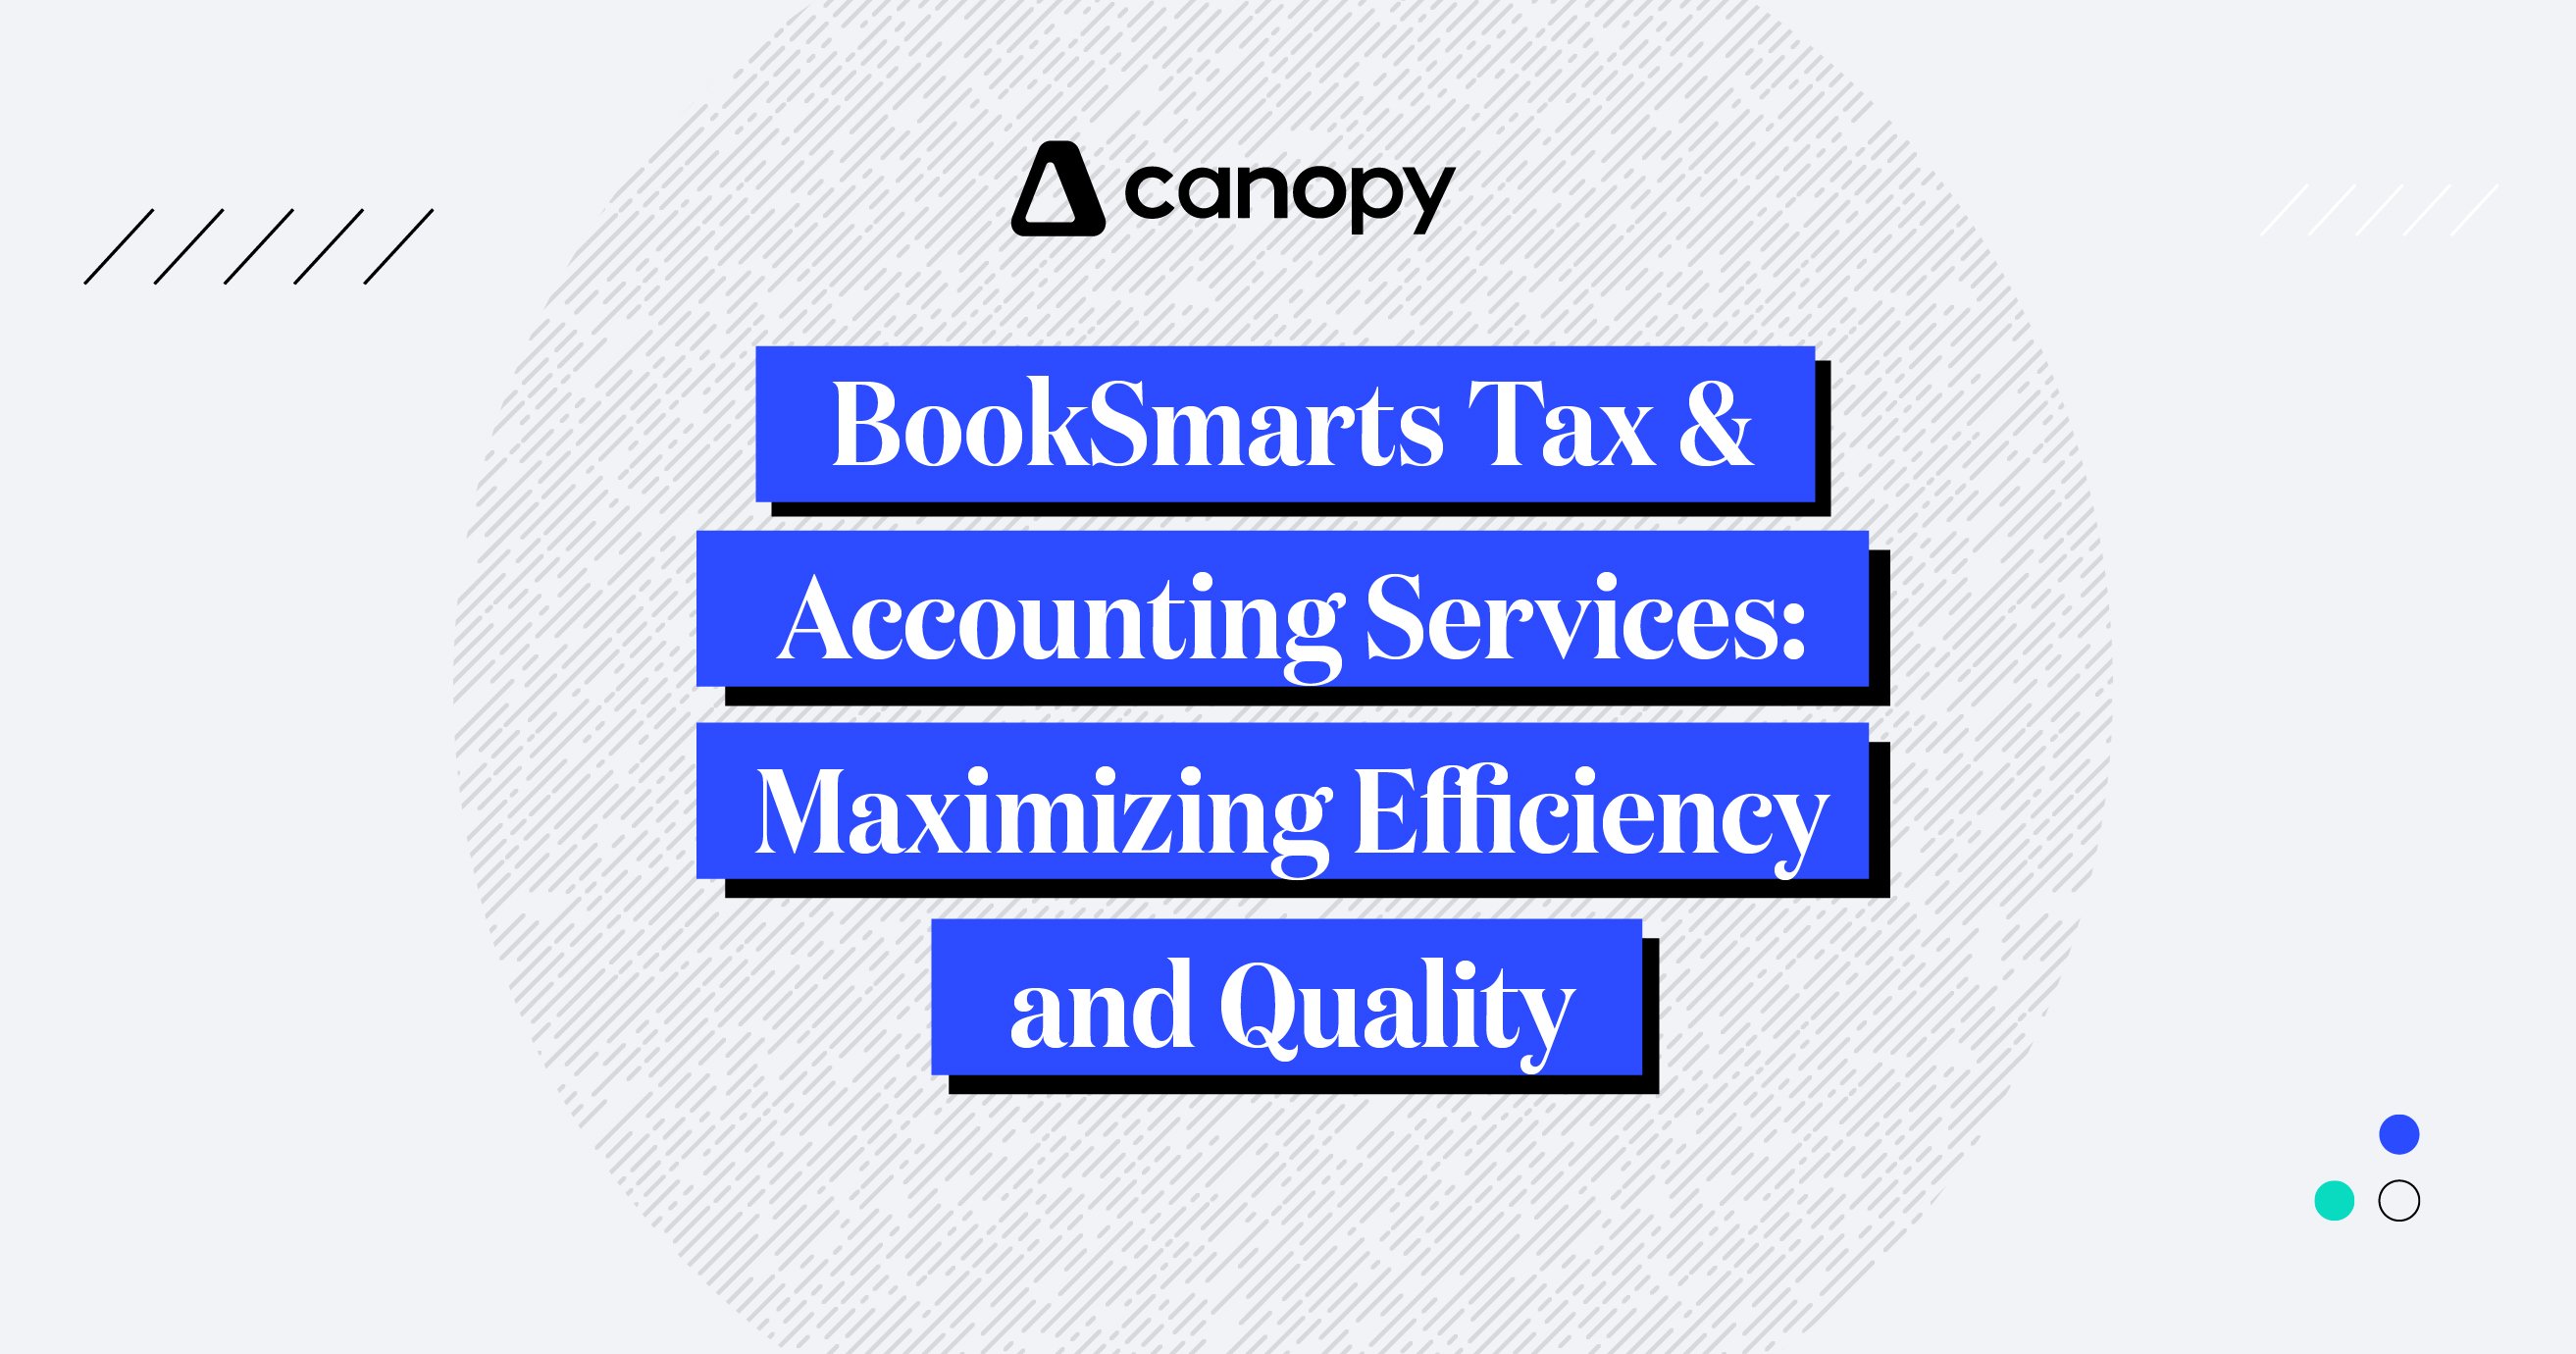 BookSmarts Tax & Accounting Services: Maximizing Efficiency and Quality